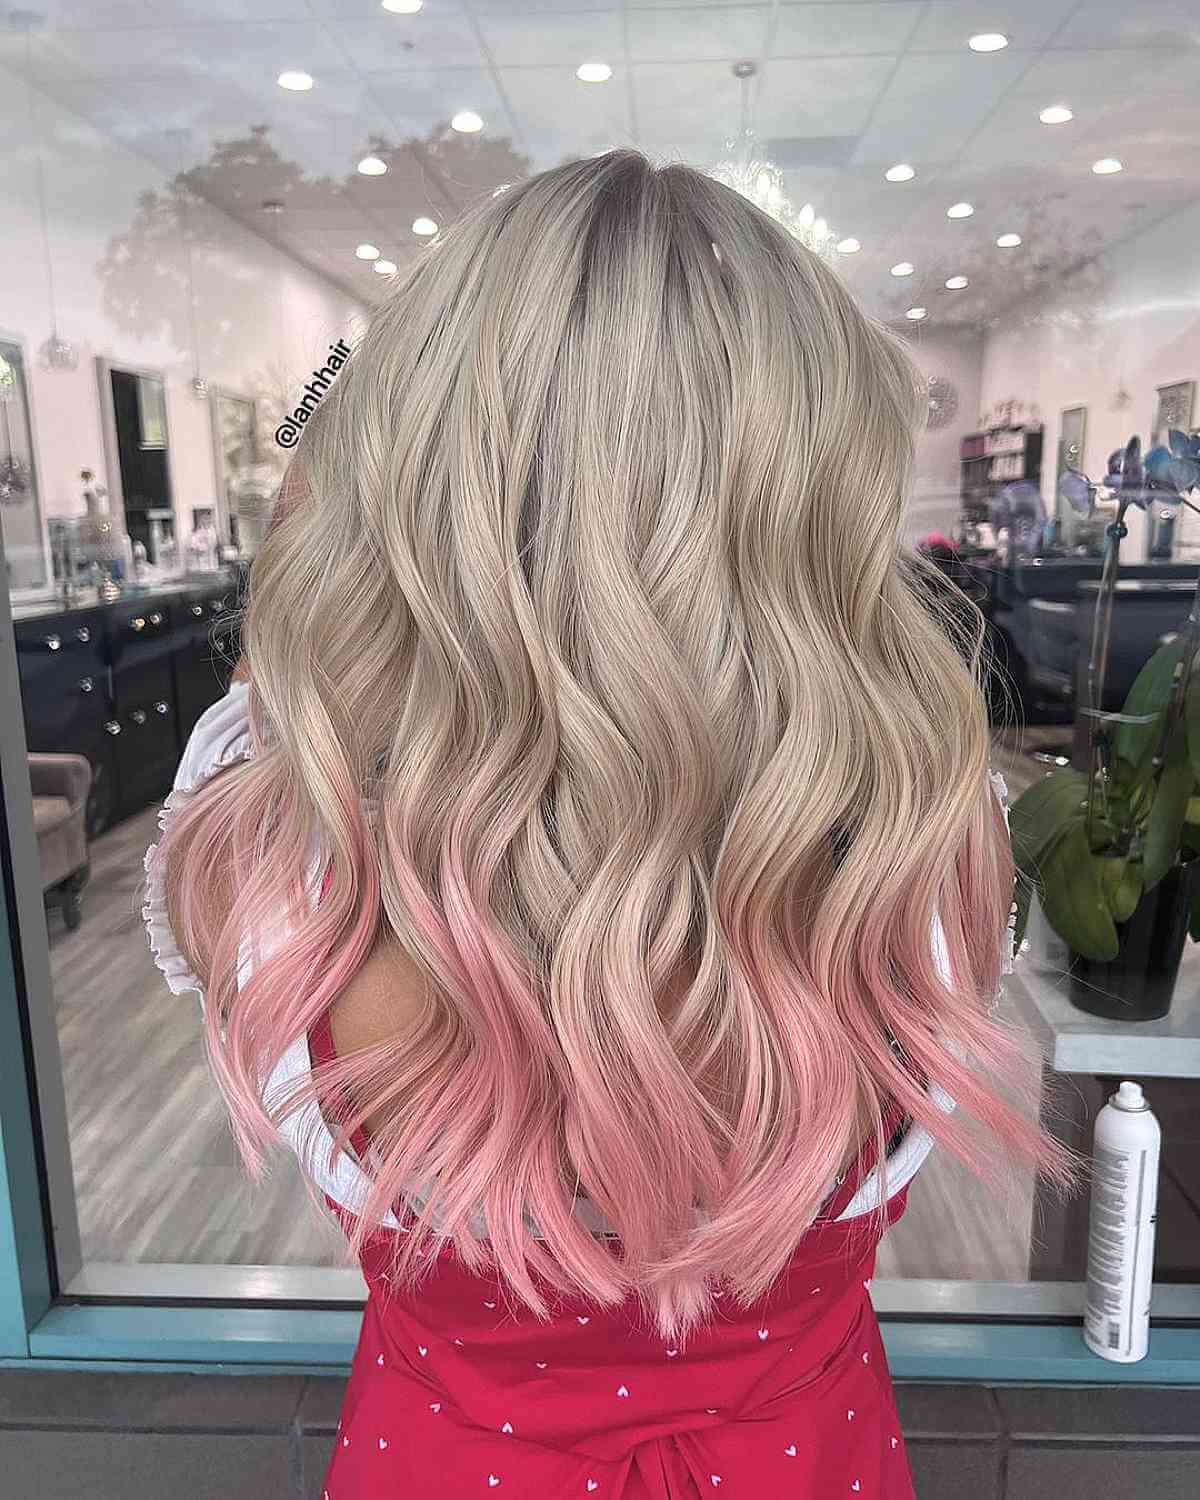 Gorgeous White Blonde Hair with Pink Tips